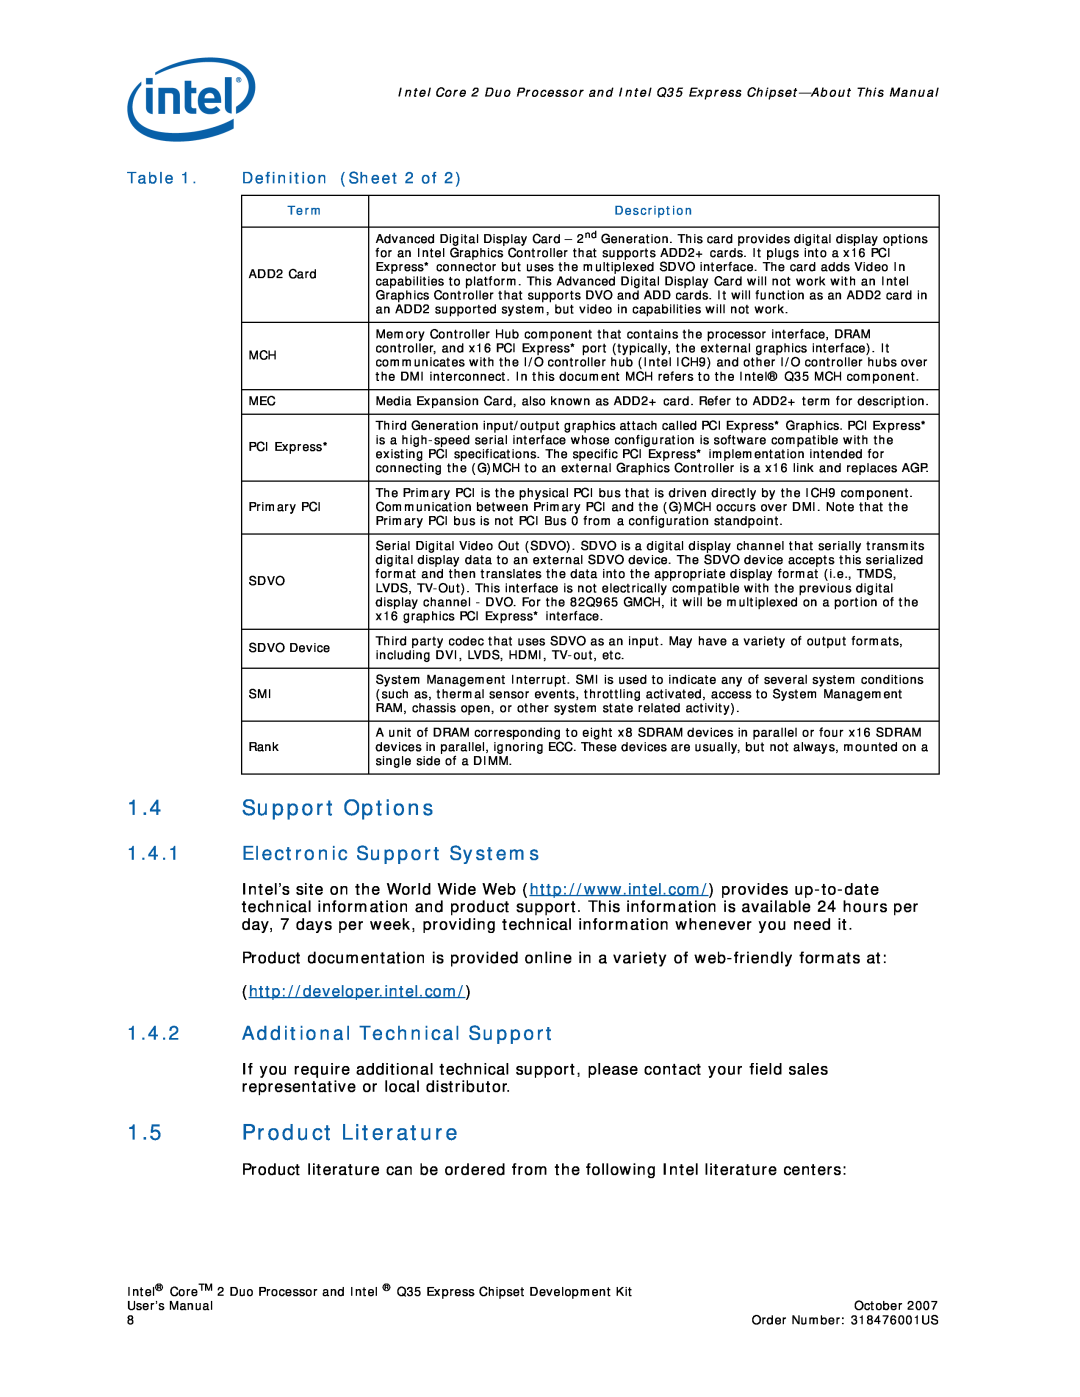 Intel Core 2 Duo Support Options, Product Literature, Electronic Support Systems, Additional Technical Support, Sheet 2 of 